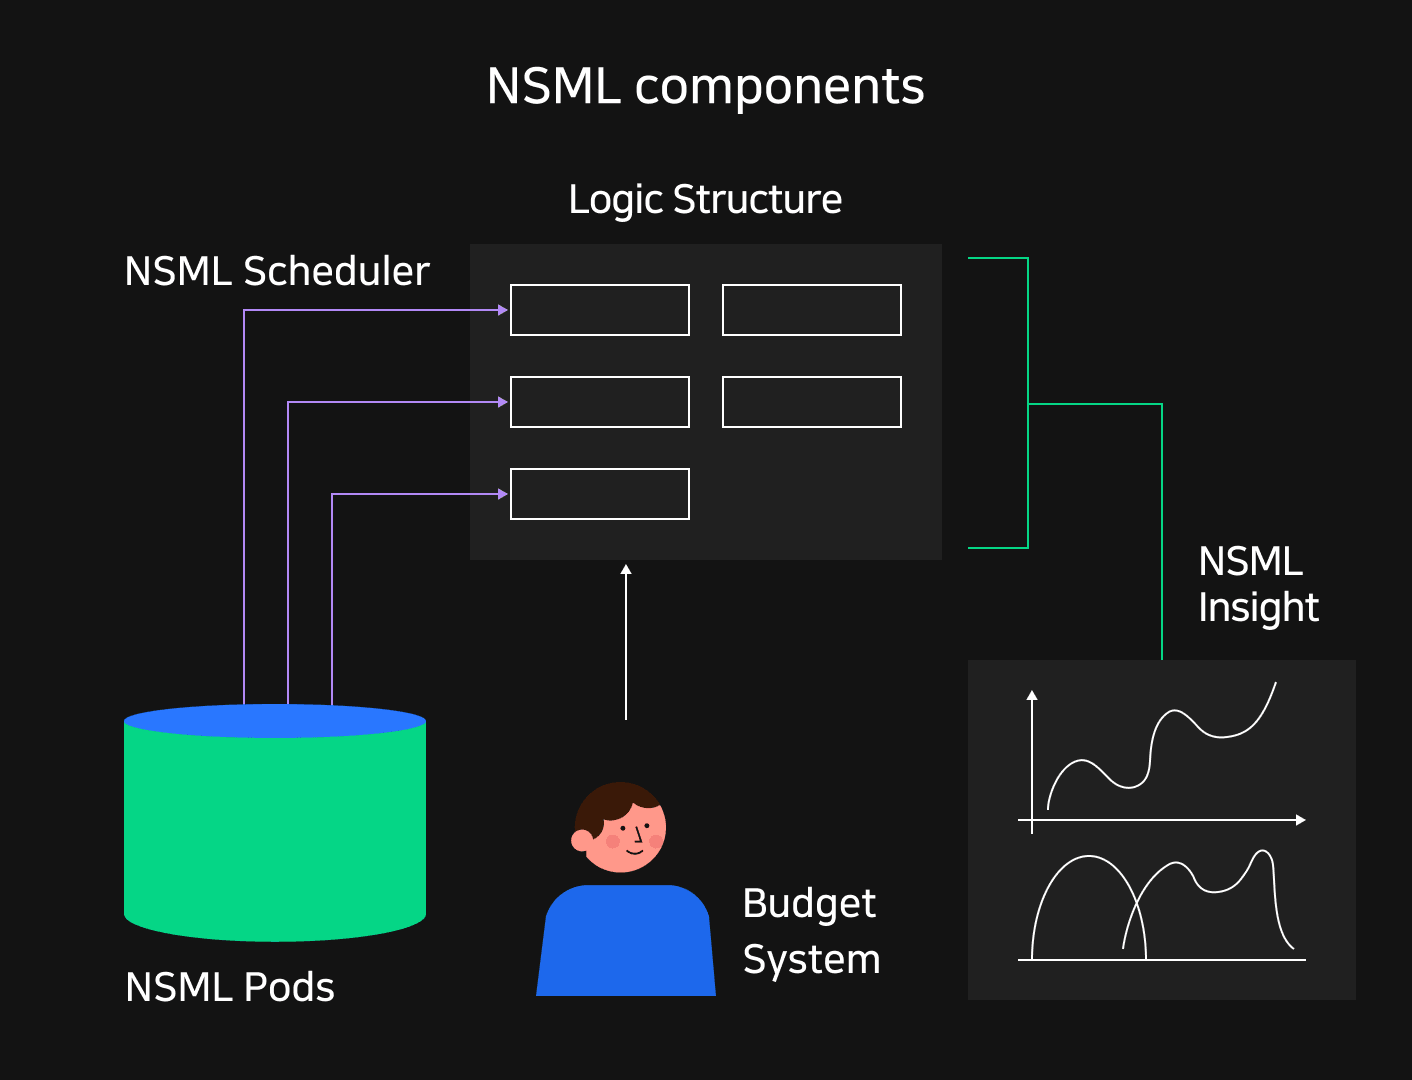 NSML's components